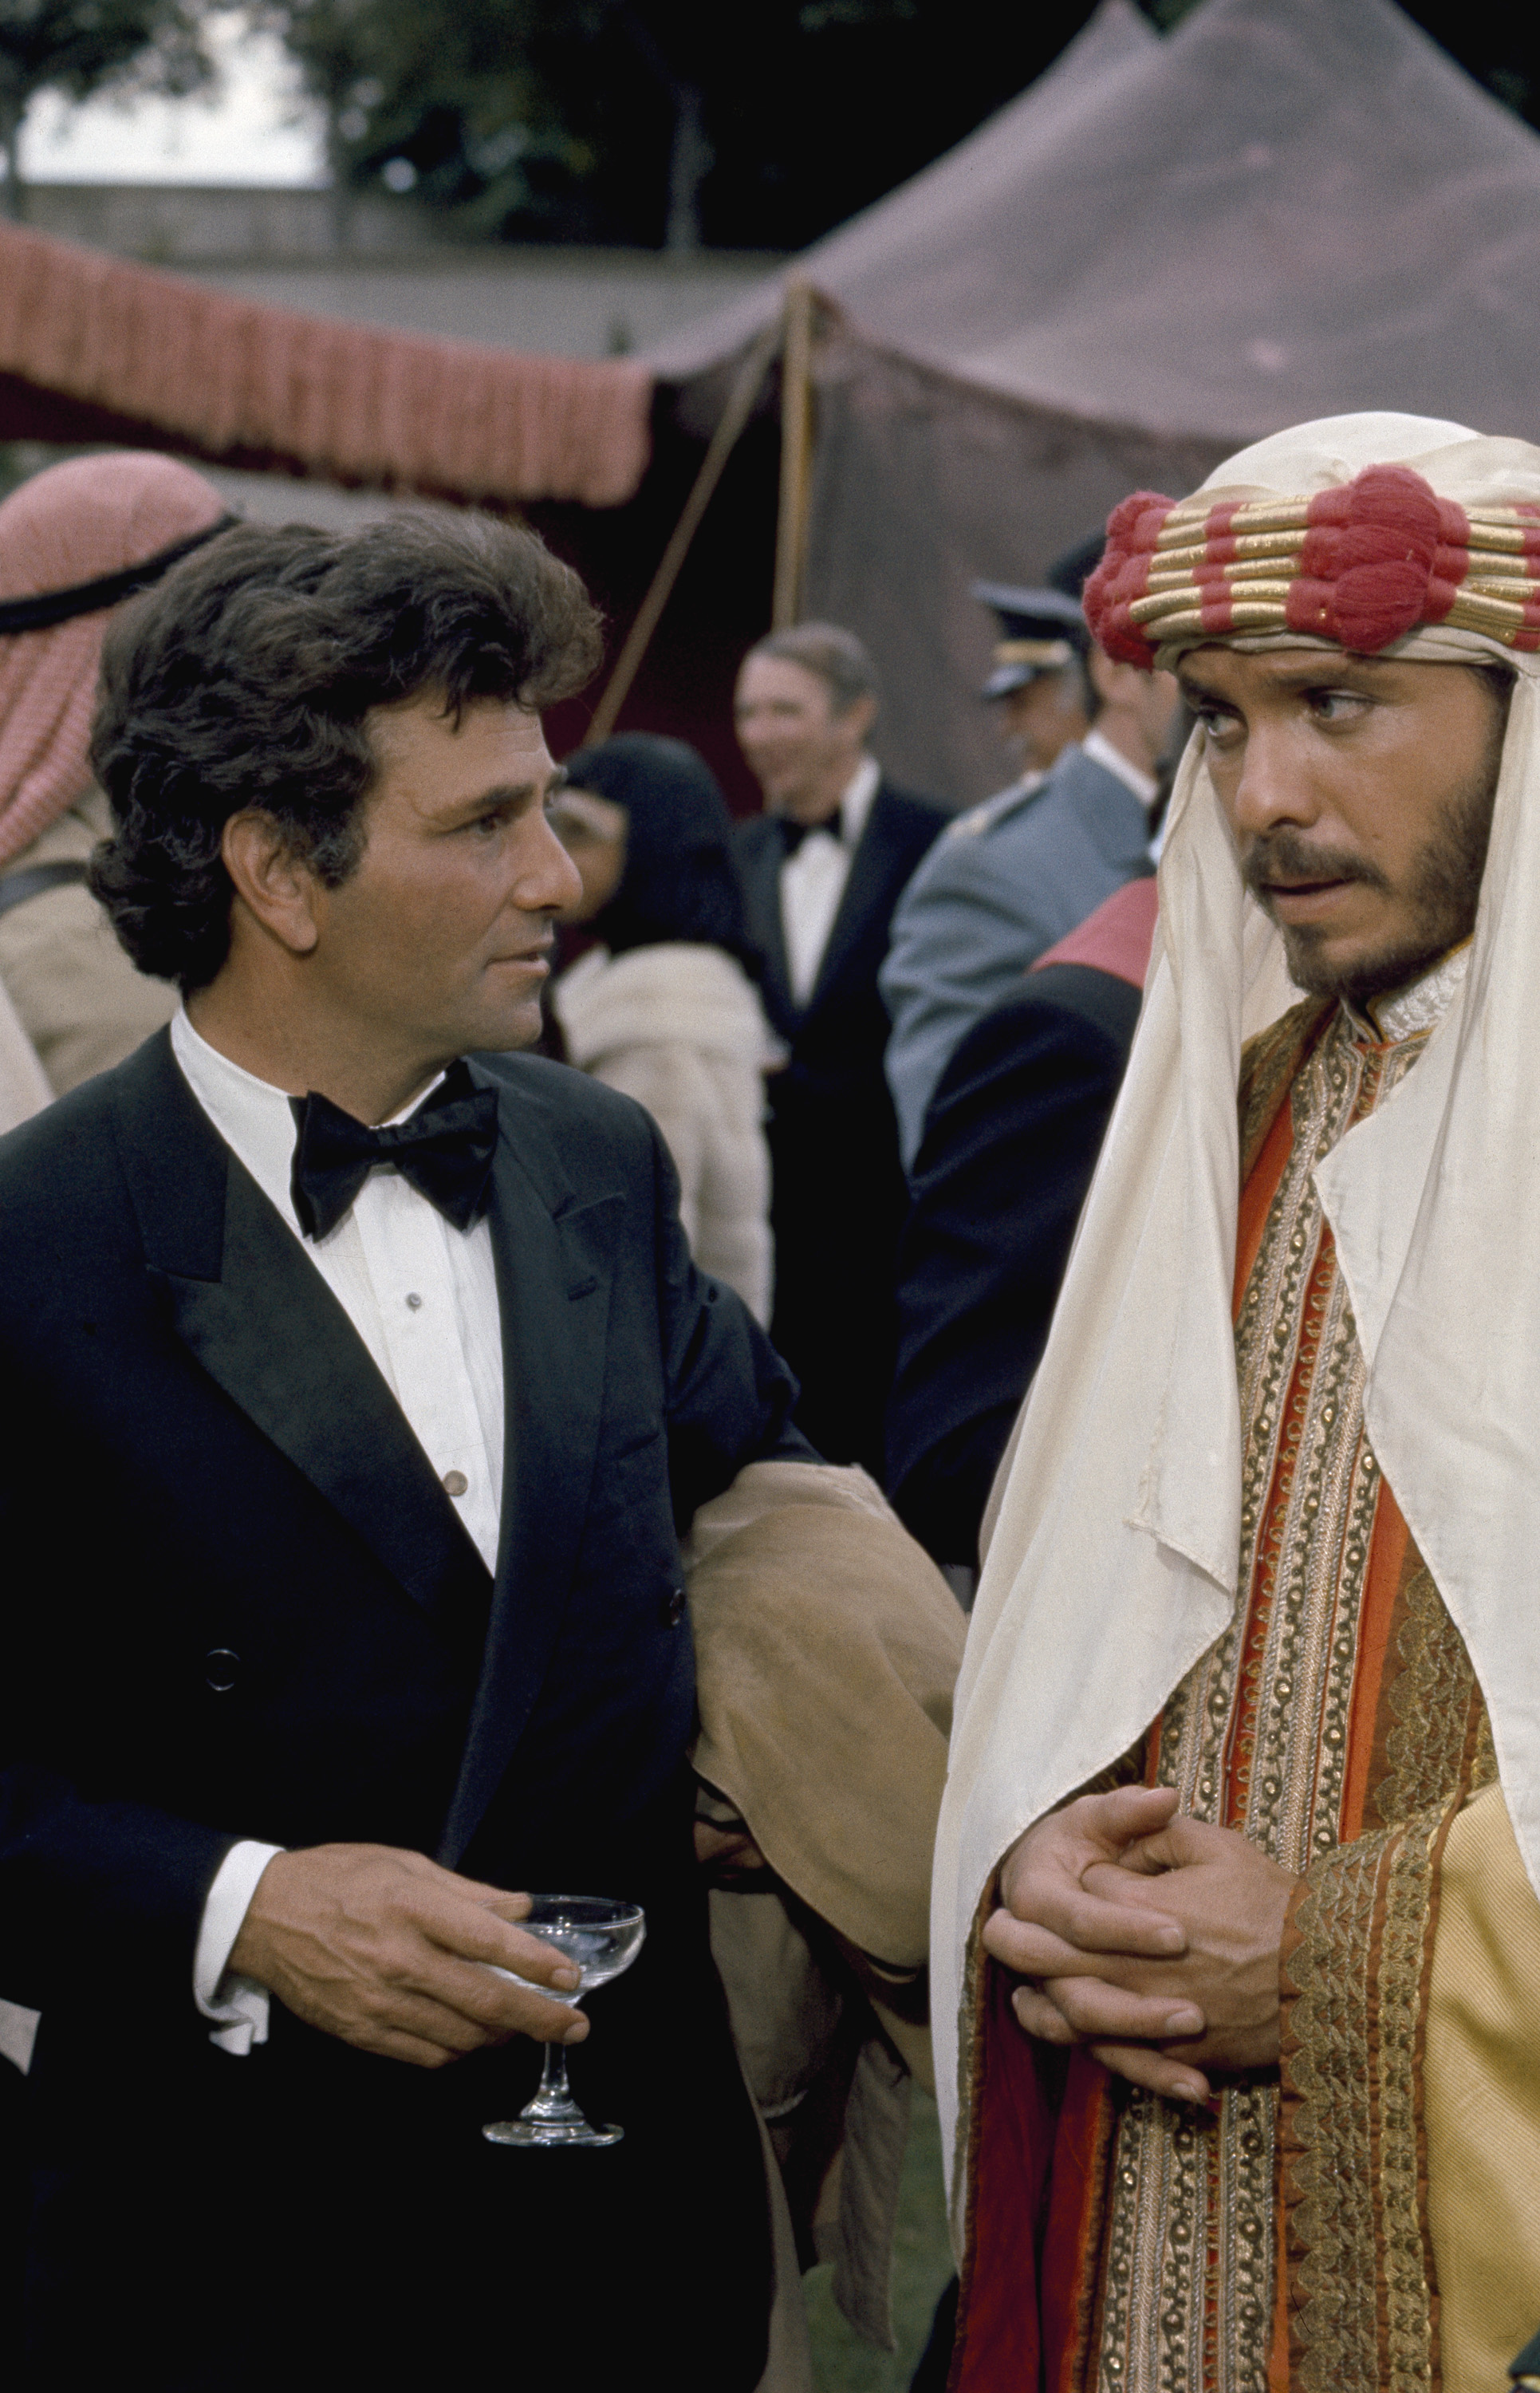 Still of Peter Falk and Hector Elizondo in Columbo (1971)